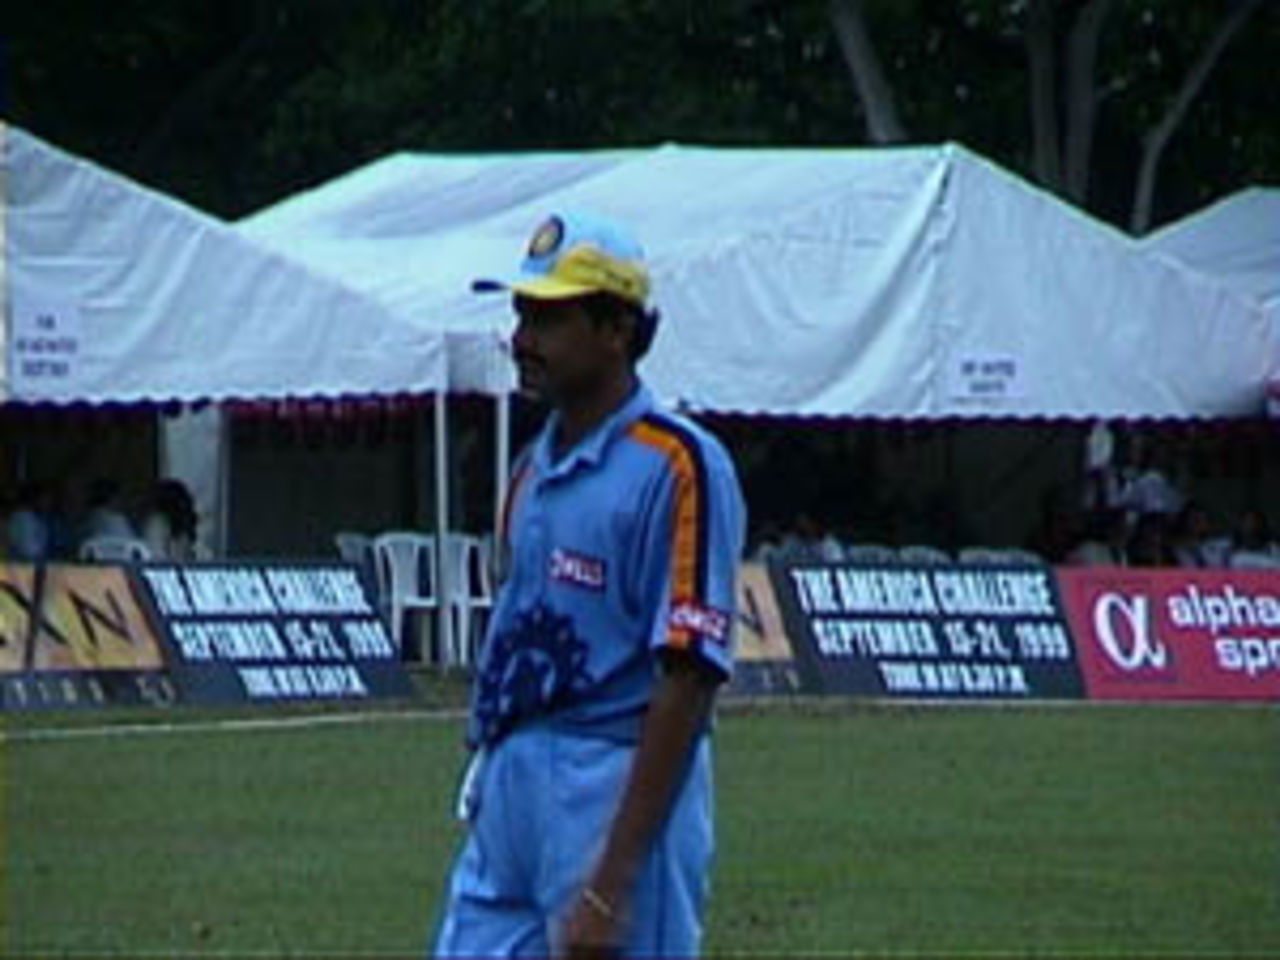 Anil Kumble, patrolling the boundary. He will be missed in Toronto. India v Zimbabwe (2nd ODI), Coca-Cola Singapore Challenge, 1999-2000, Kallang Ground, Singapore, 4 Sep 1999